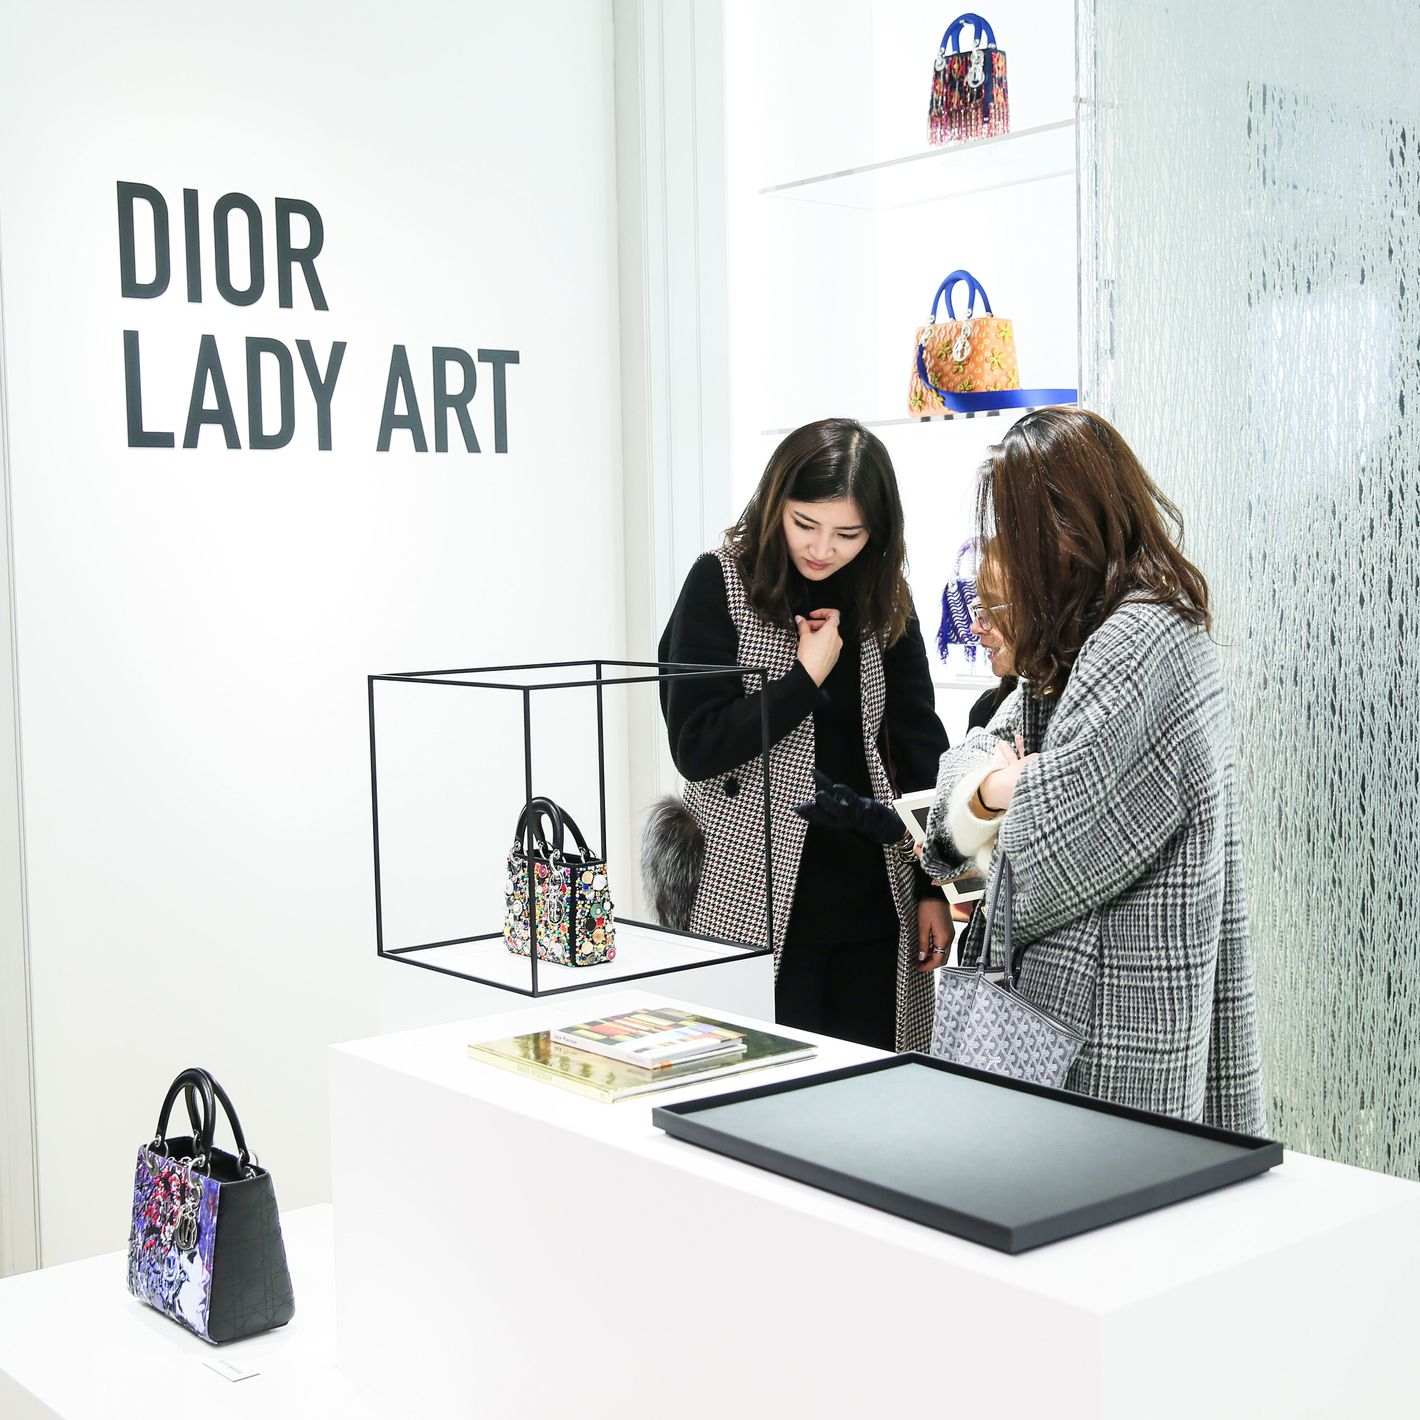 Christian Dior Started Out as an Art Gallerist Now His Fashion House Has  Opened a Galerie Dior in Paris